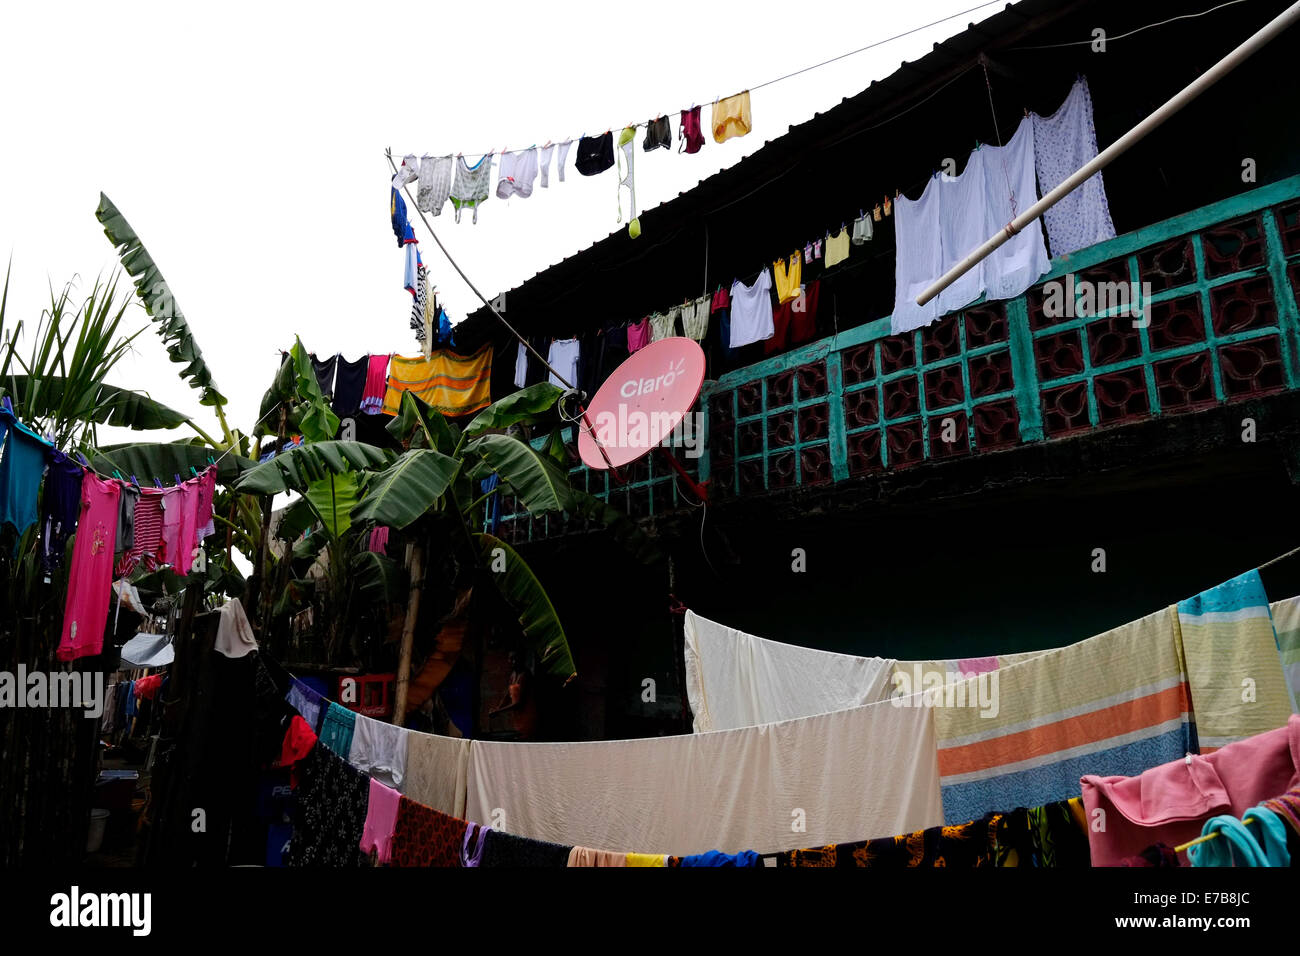 Satellite dish amid laundry in Carti Sugtupu island village administered by Guna natives known as Kuna in the 'Comarca' (region) of the Guna Yala located in the archipelago of San Blas Blas islands in the Northeast of Panama facing the Caribbean Sea. Stock Photo